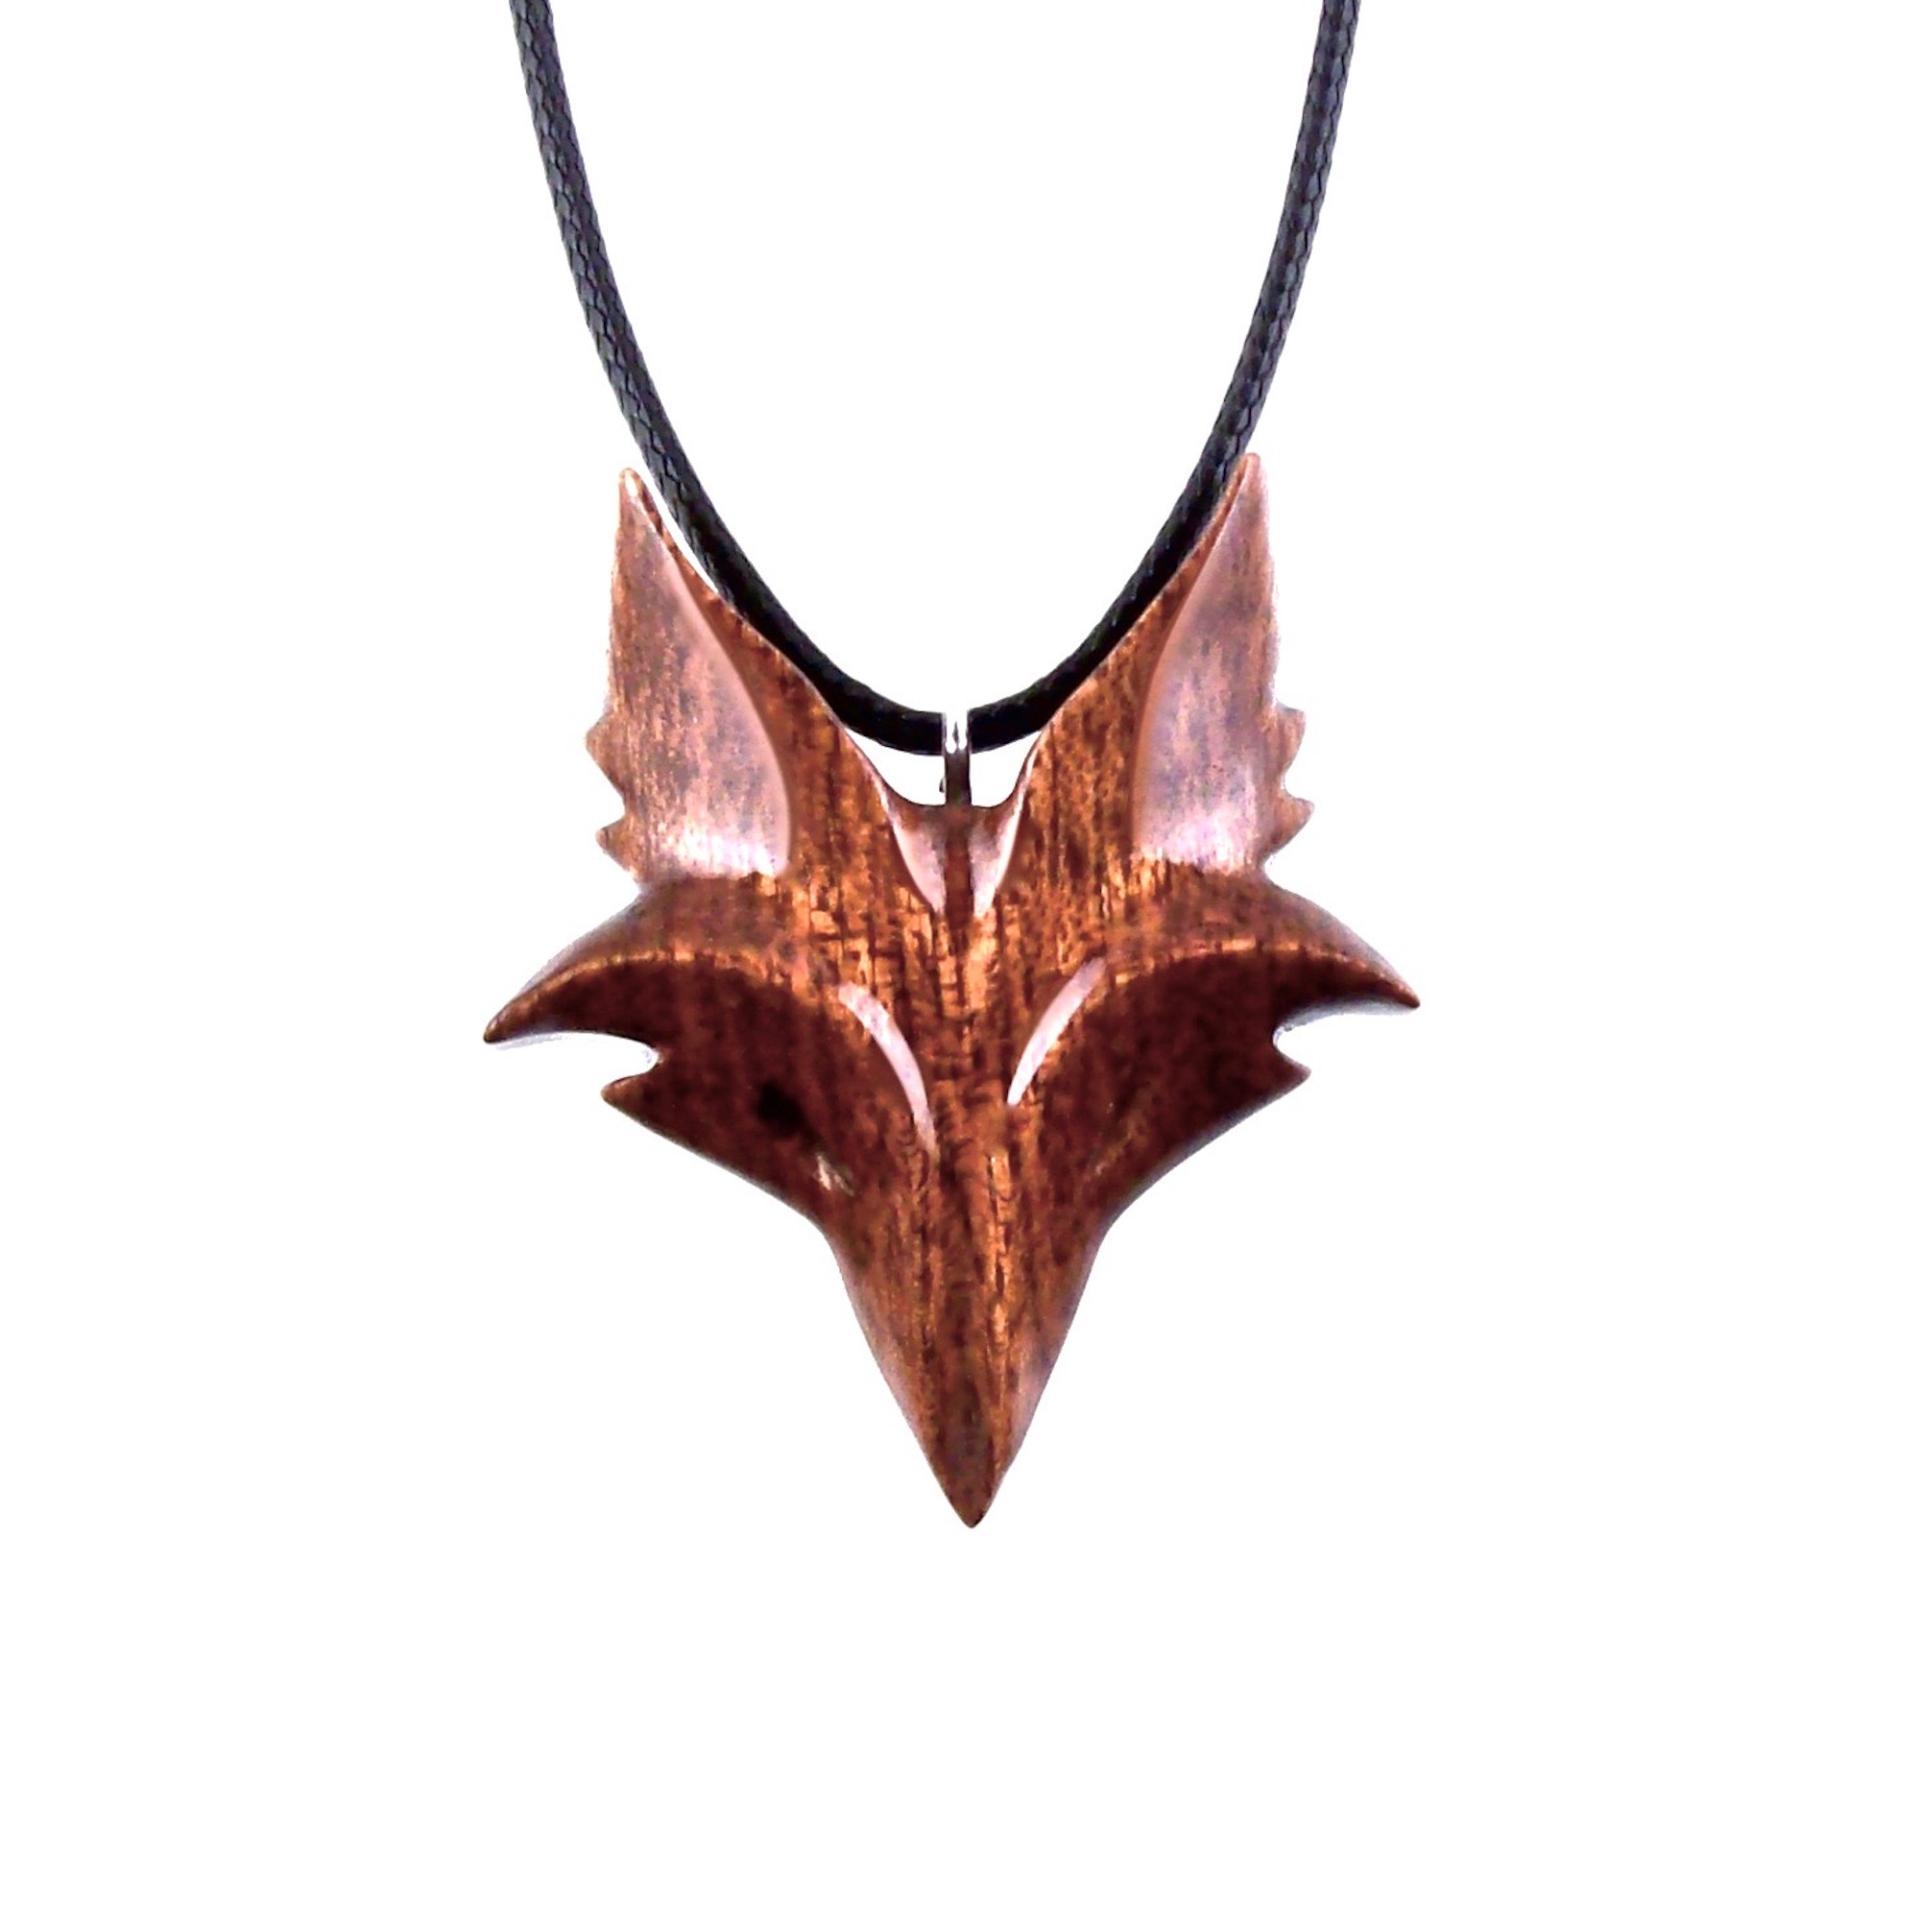 Wooden Fox Pendant, Hand Carved Celtic Fox Necklace, Totem Spirit Animal, One of a Kind Wood Jewelry Gift for Her Him